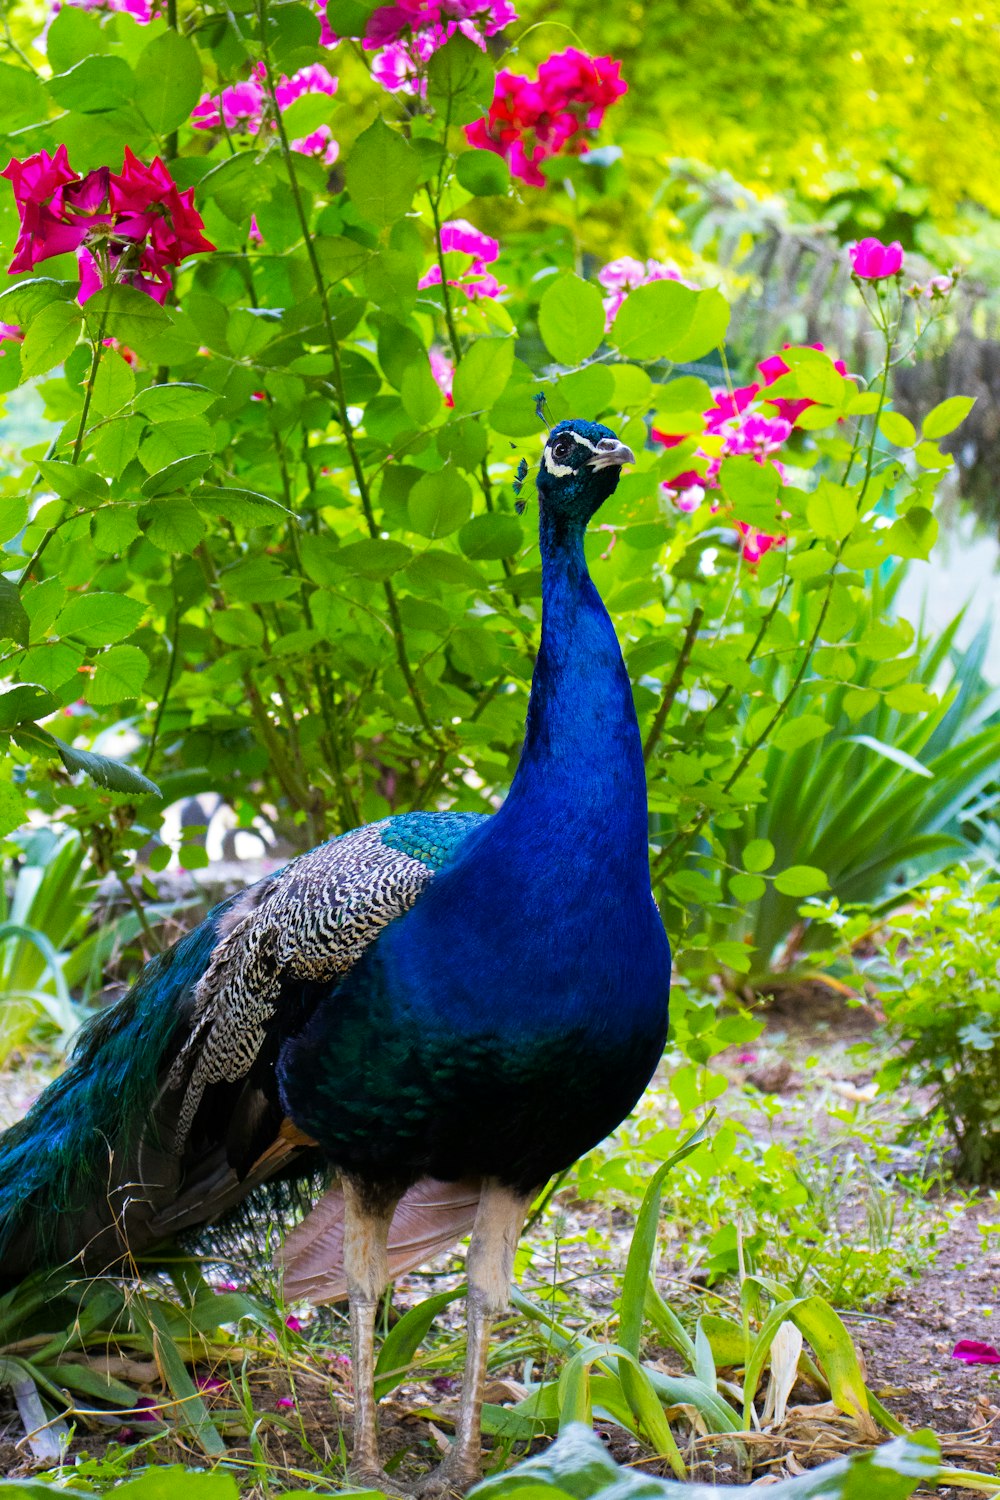 a peacock standing in front of a garden